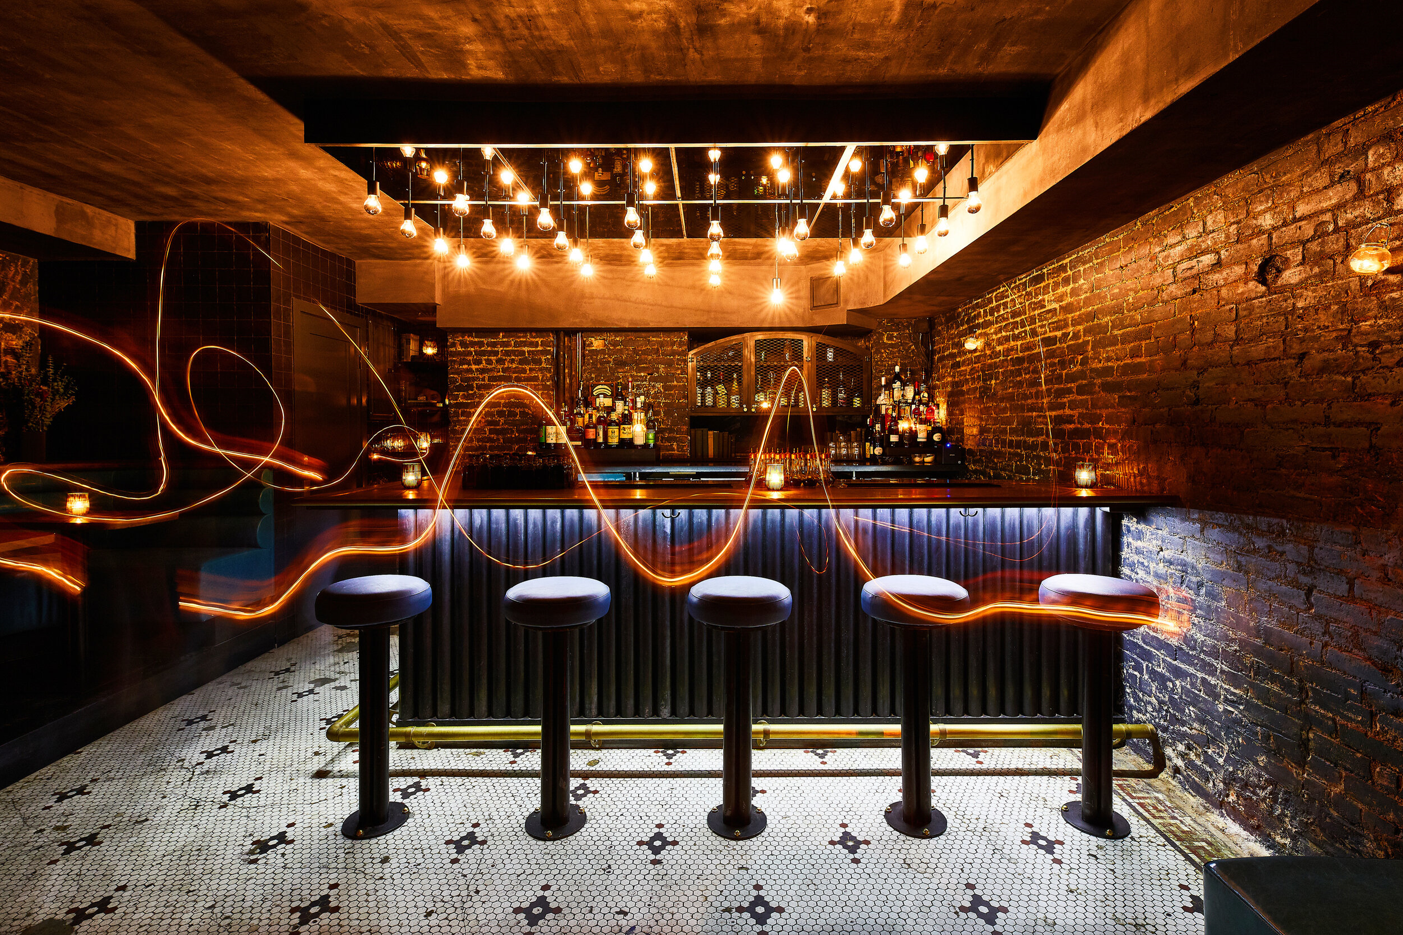 An underground bar featuring exposed brick and a ceiling installation of hanging light bulbs.